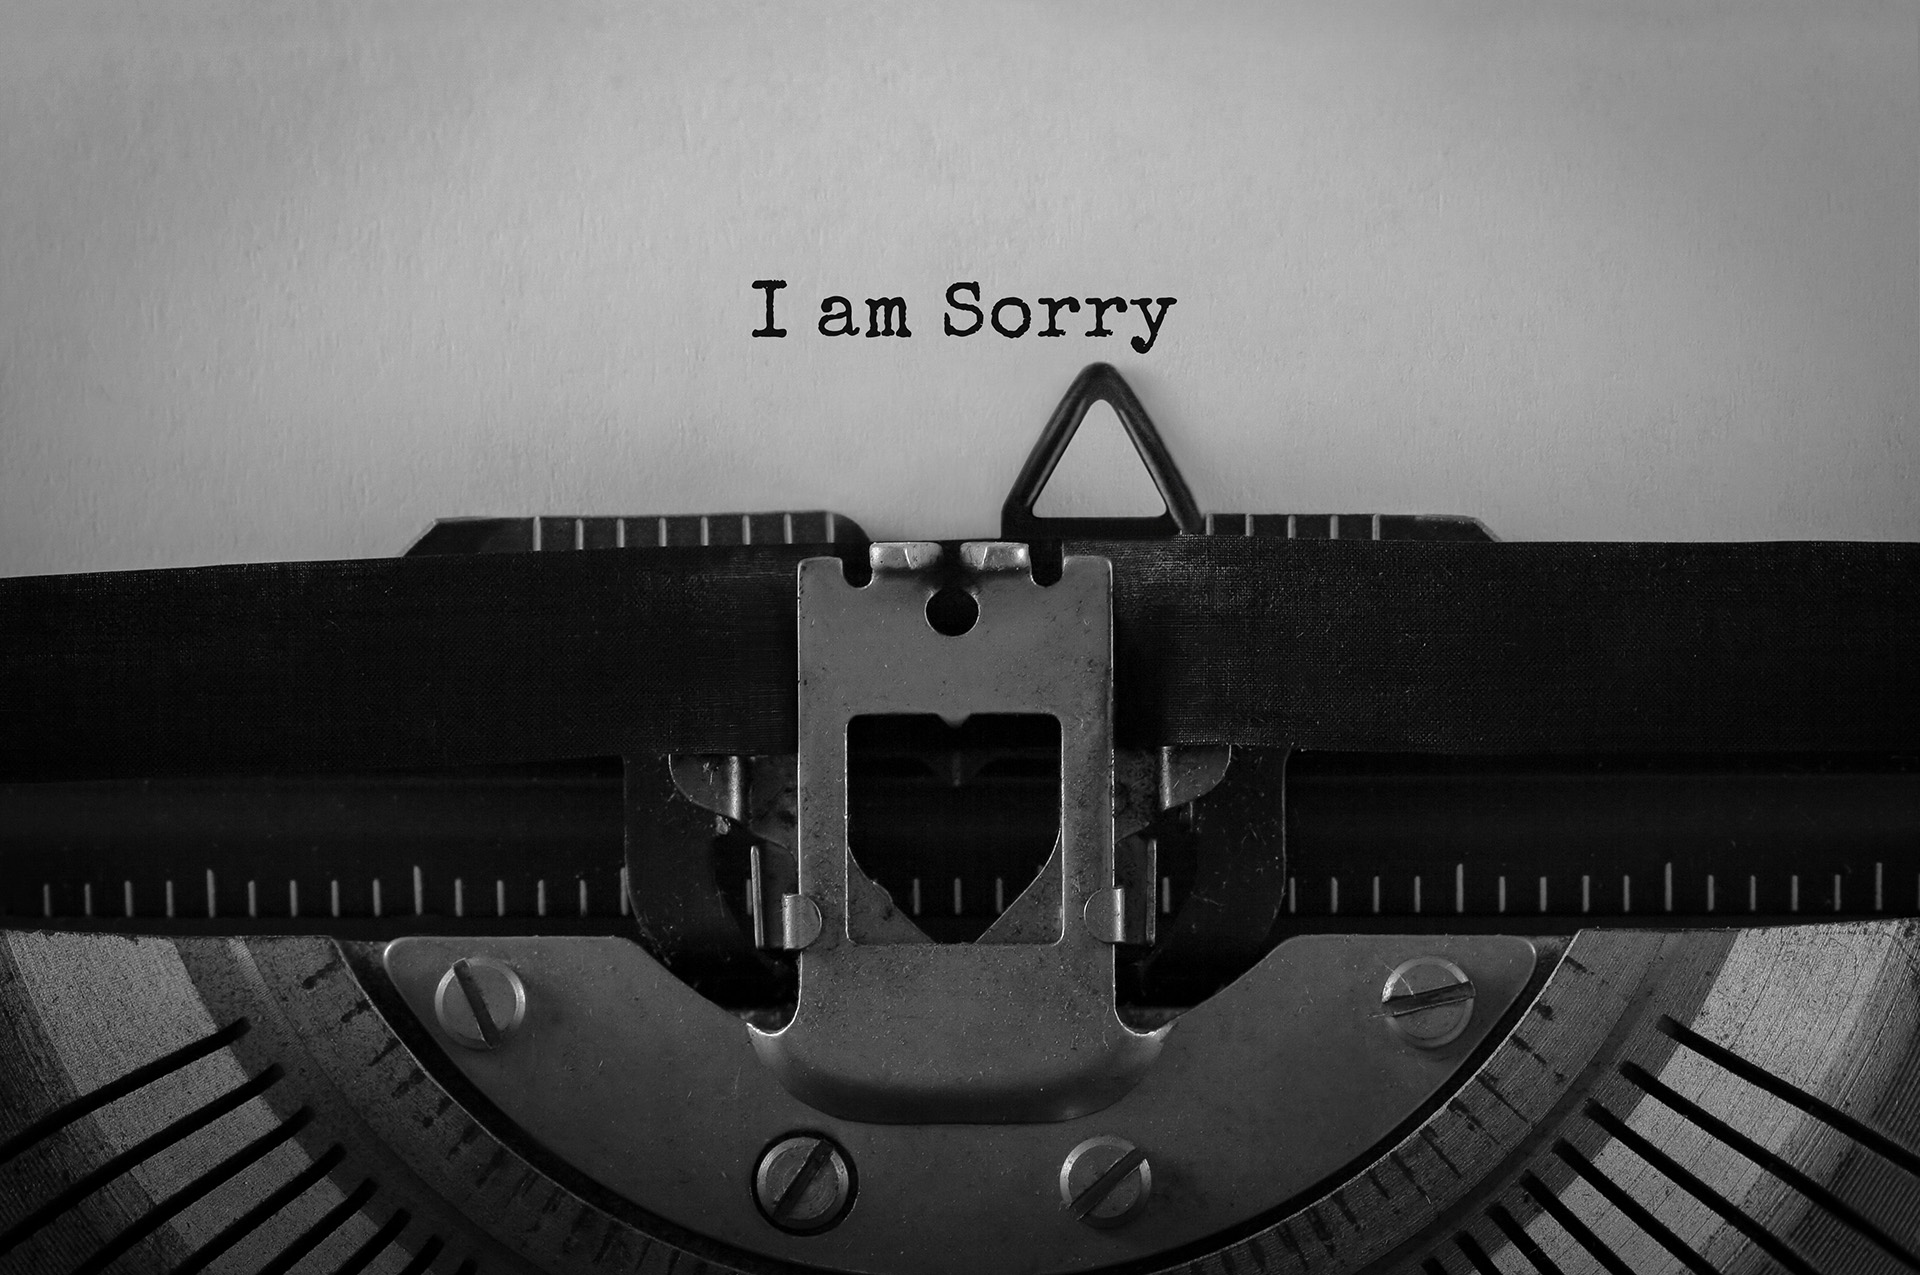 The words 'I am sorry' typed out with typewriter